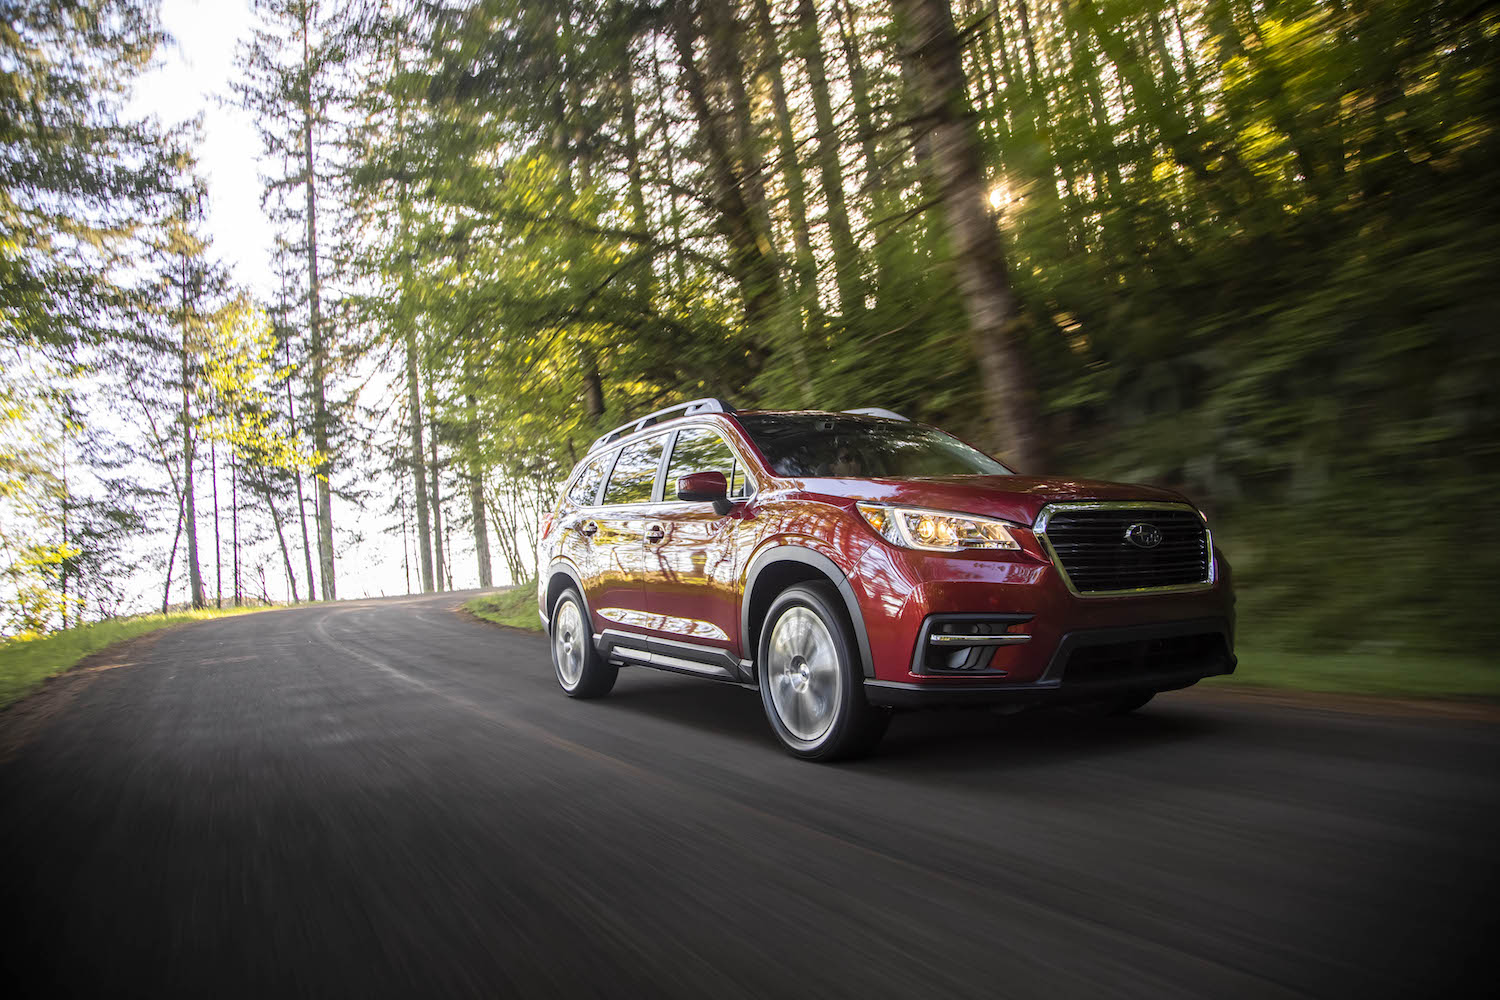 2021 Subaru Ascent rounding a bend in the woods.